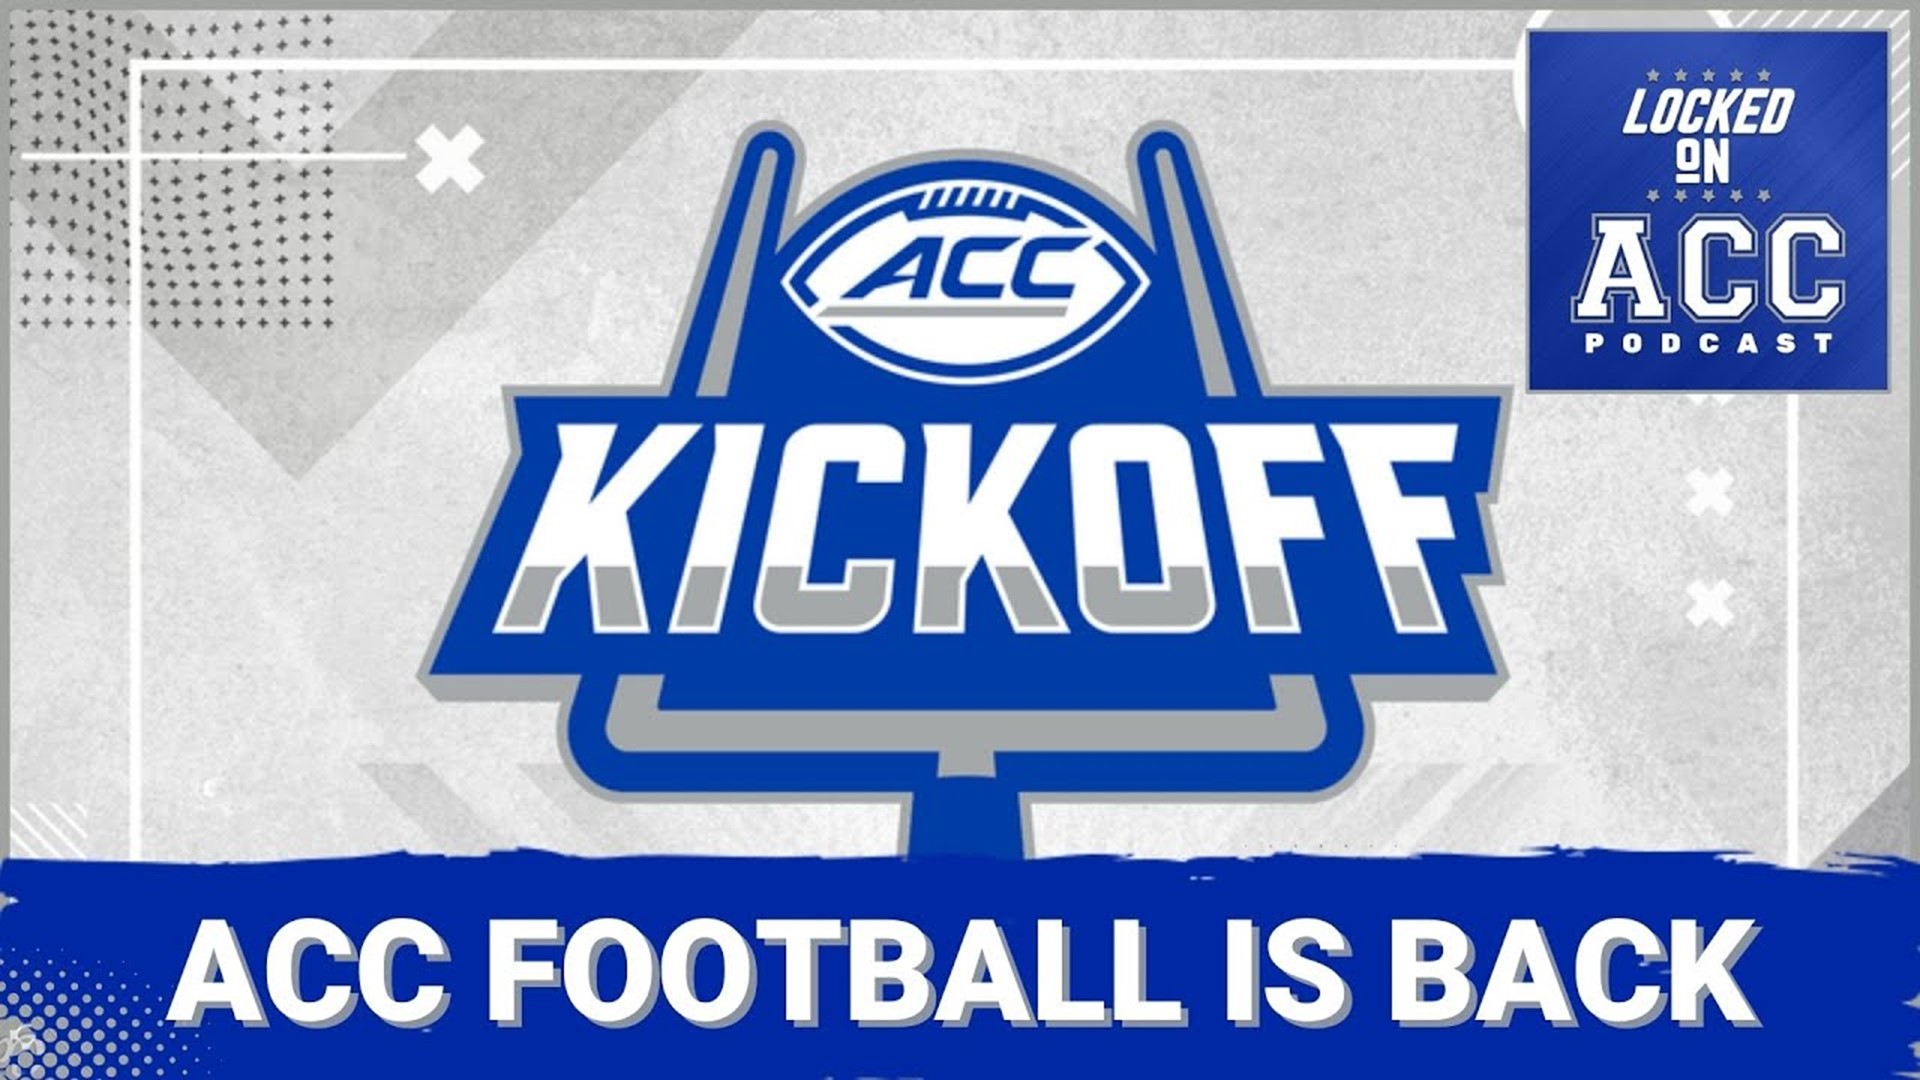 ACC Football is finally back and we kick things off with 3 days of interviews with your favorite Head Coaches and Players from each program.